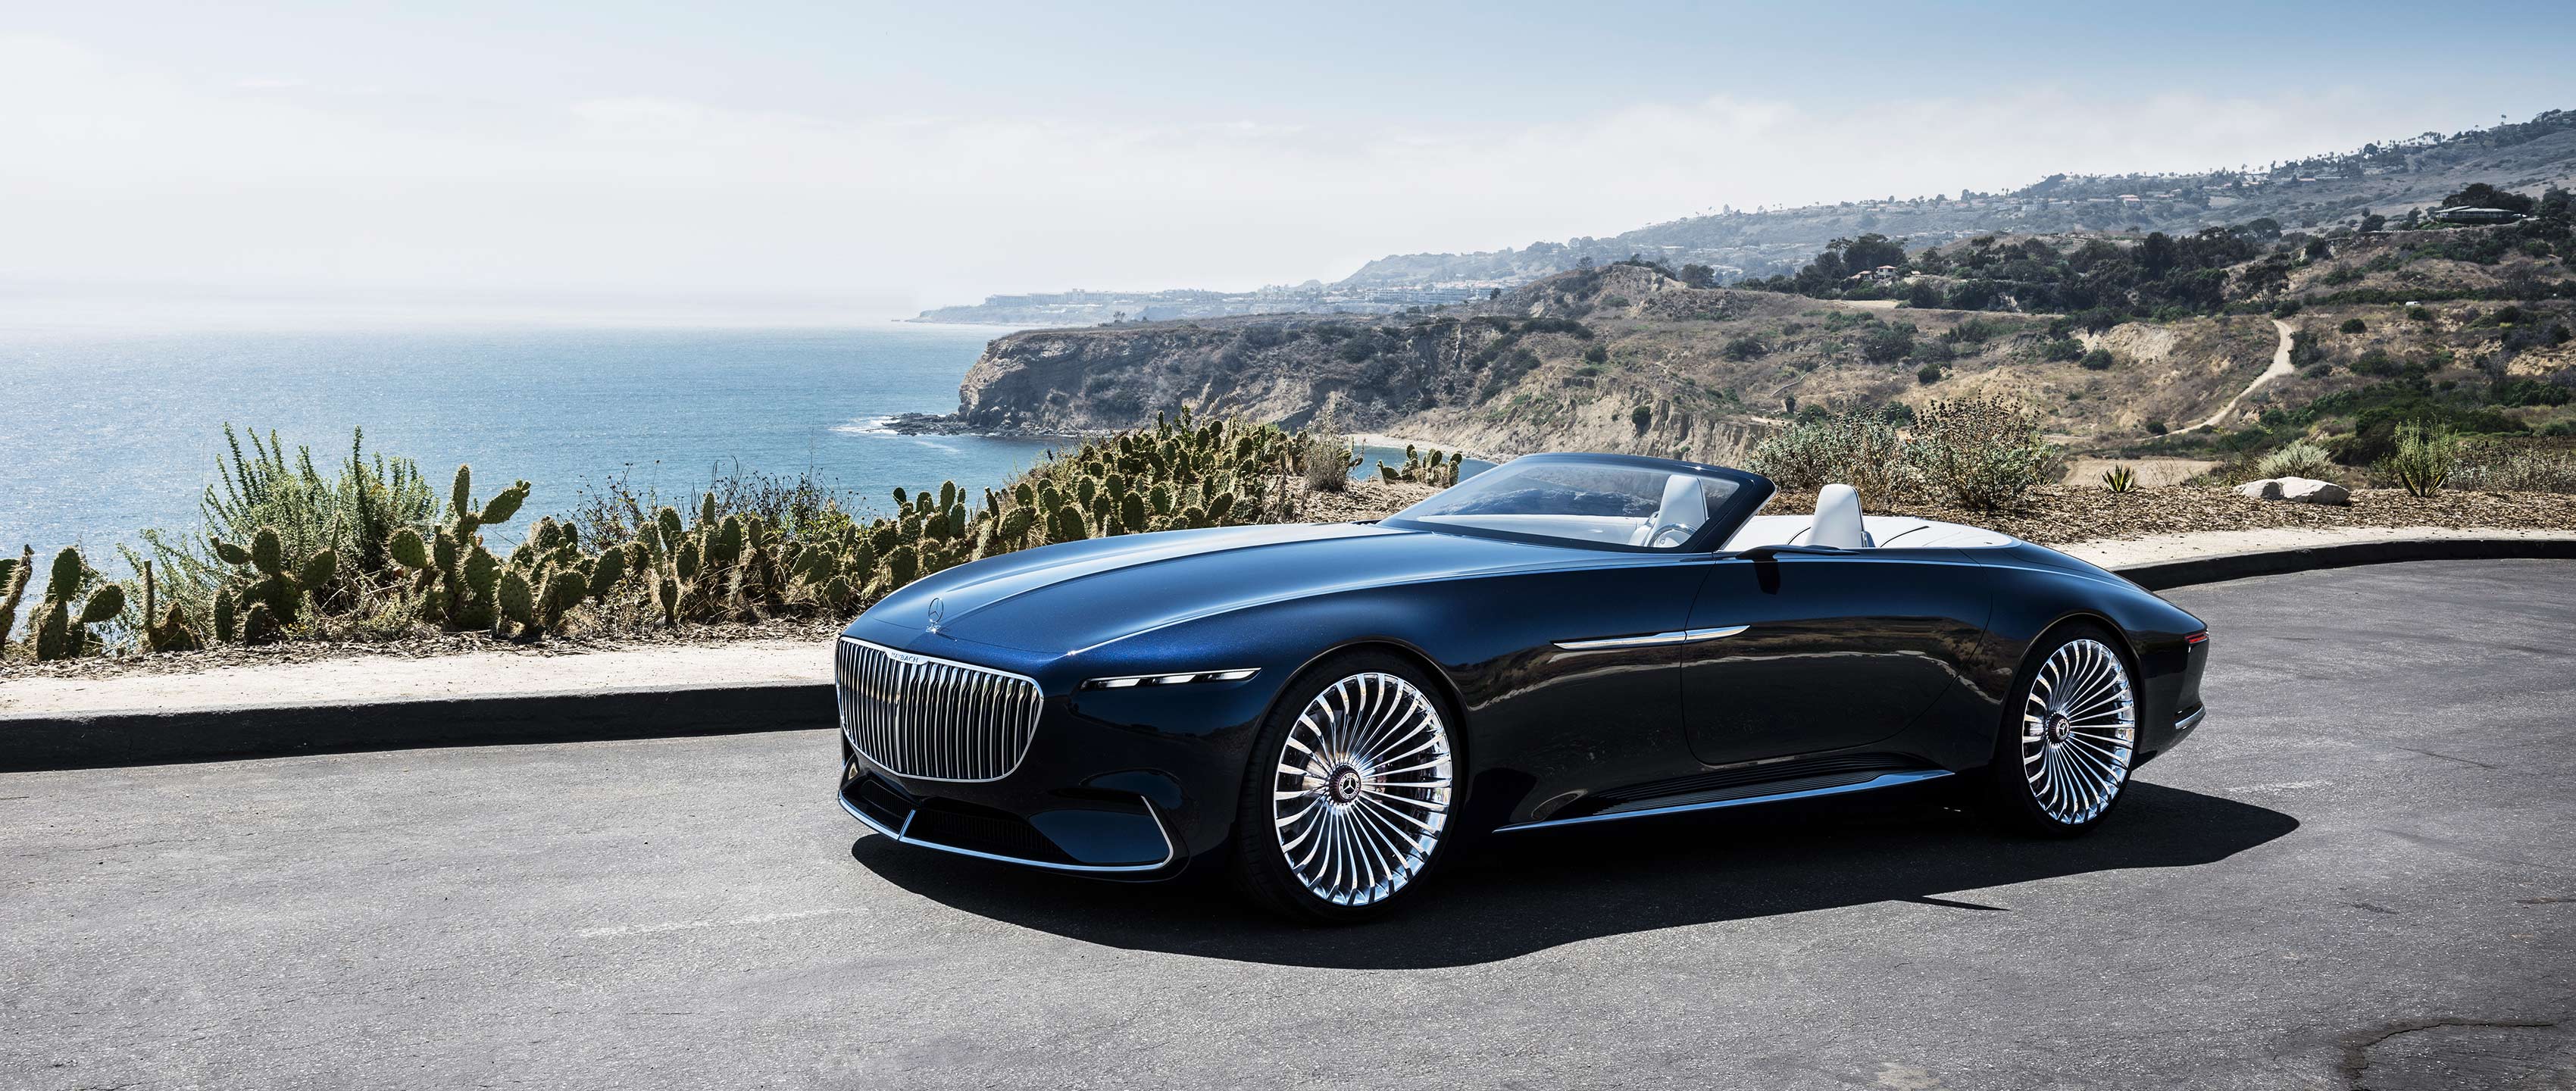 00-mercedes-benz-vehicles-vision-mercedes-maybach-6-cabriolet-3400x1440